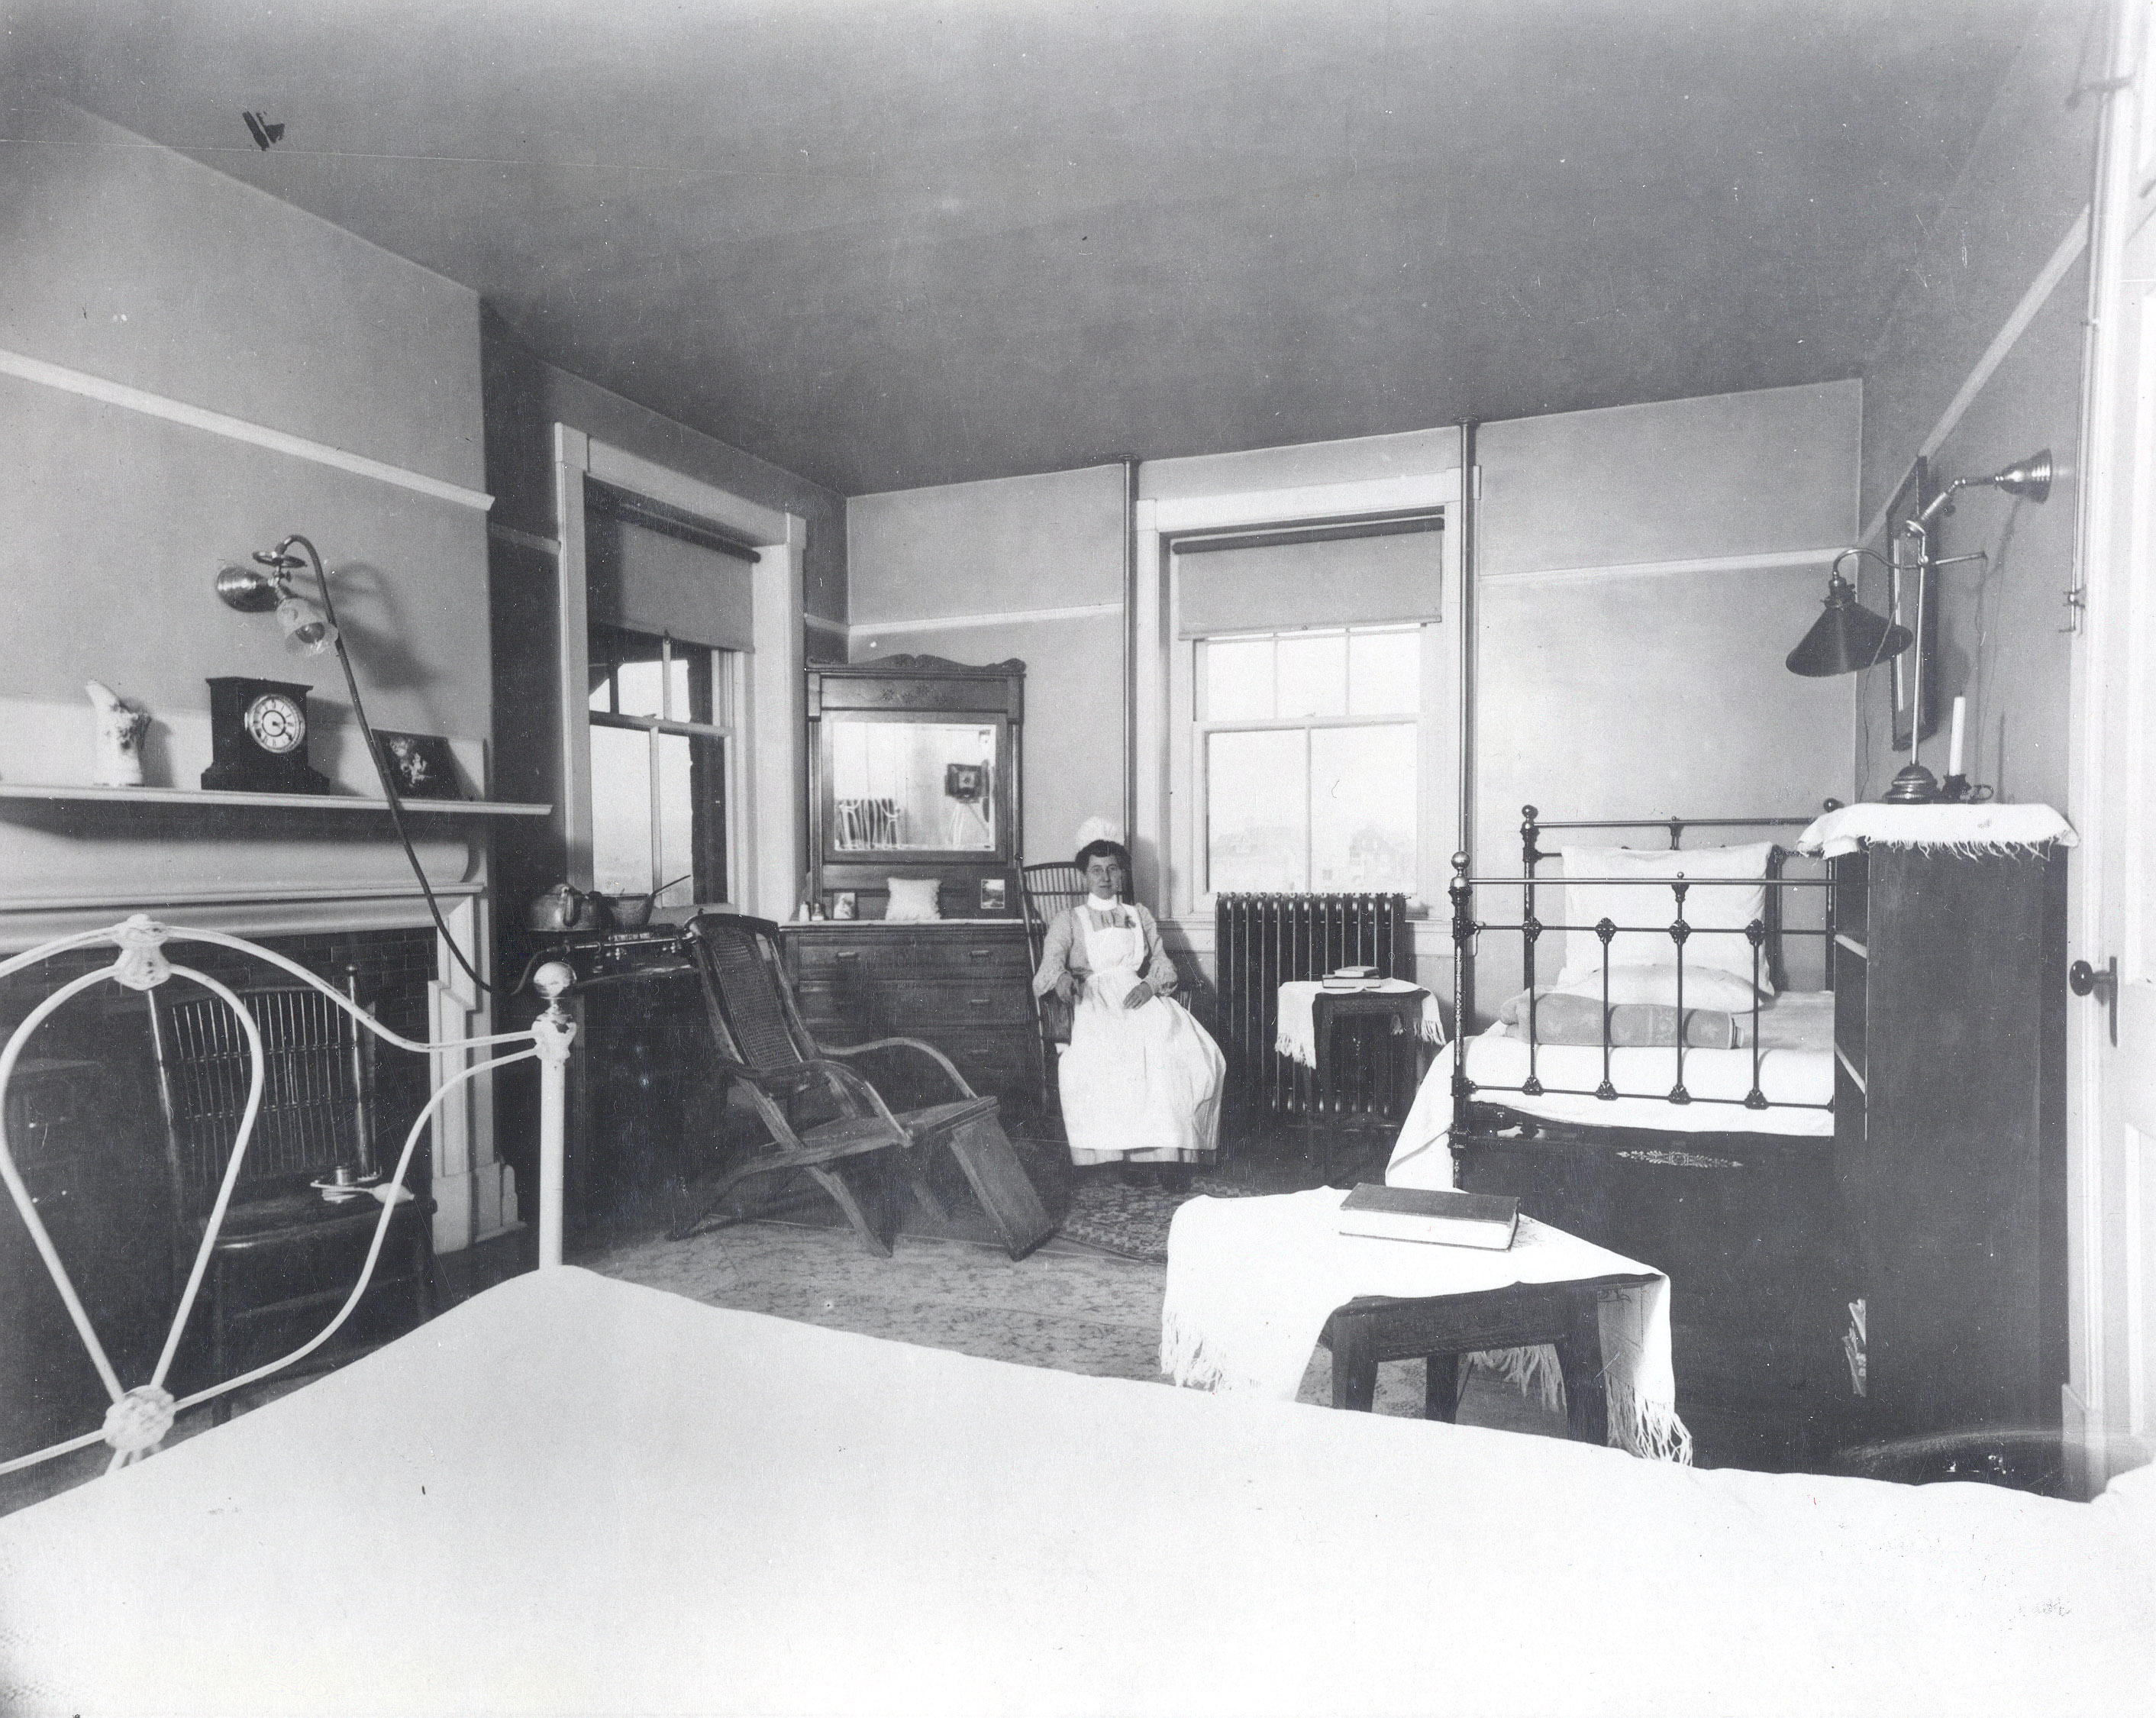 Ticknor Hall Infirmary Room Early 1900s <span class="cc-gallery-credit"></span>